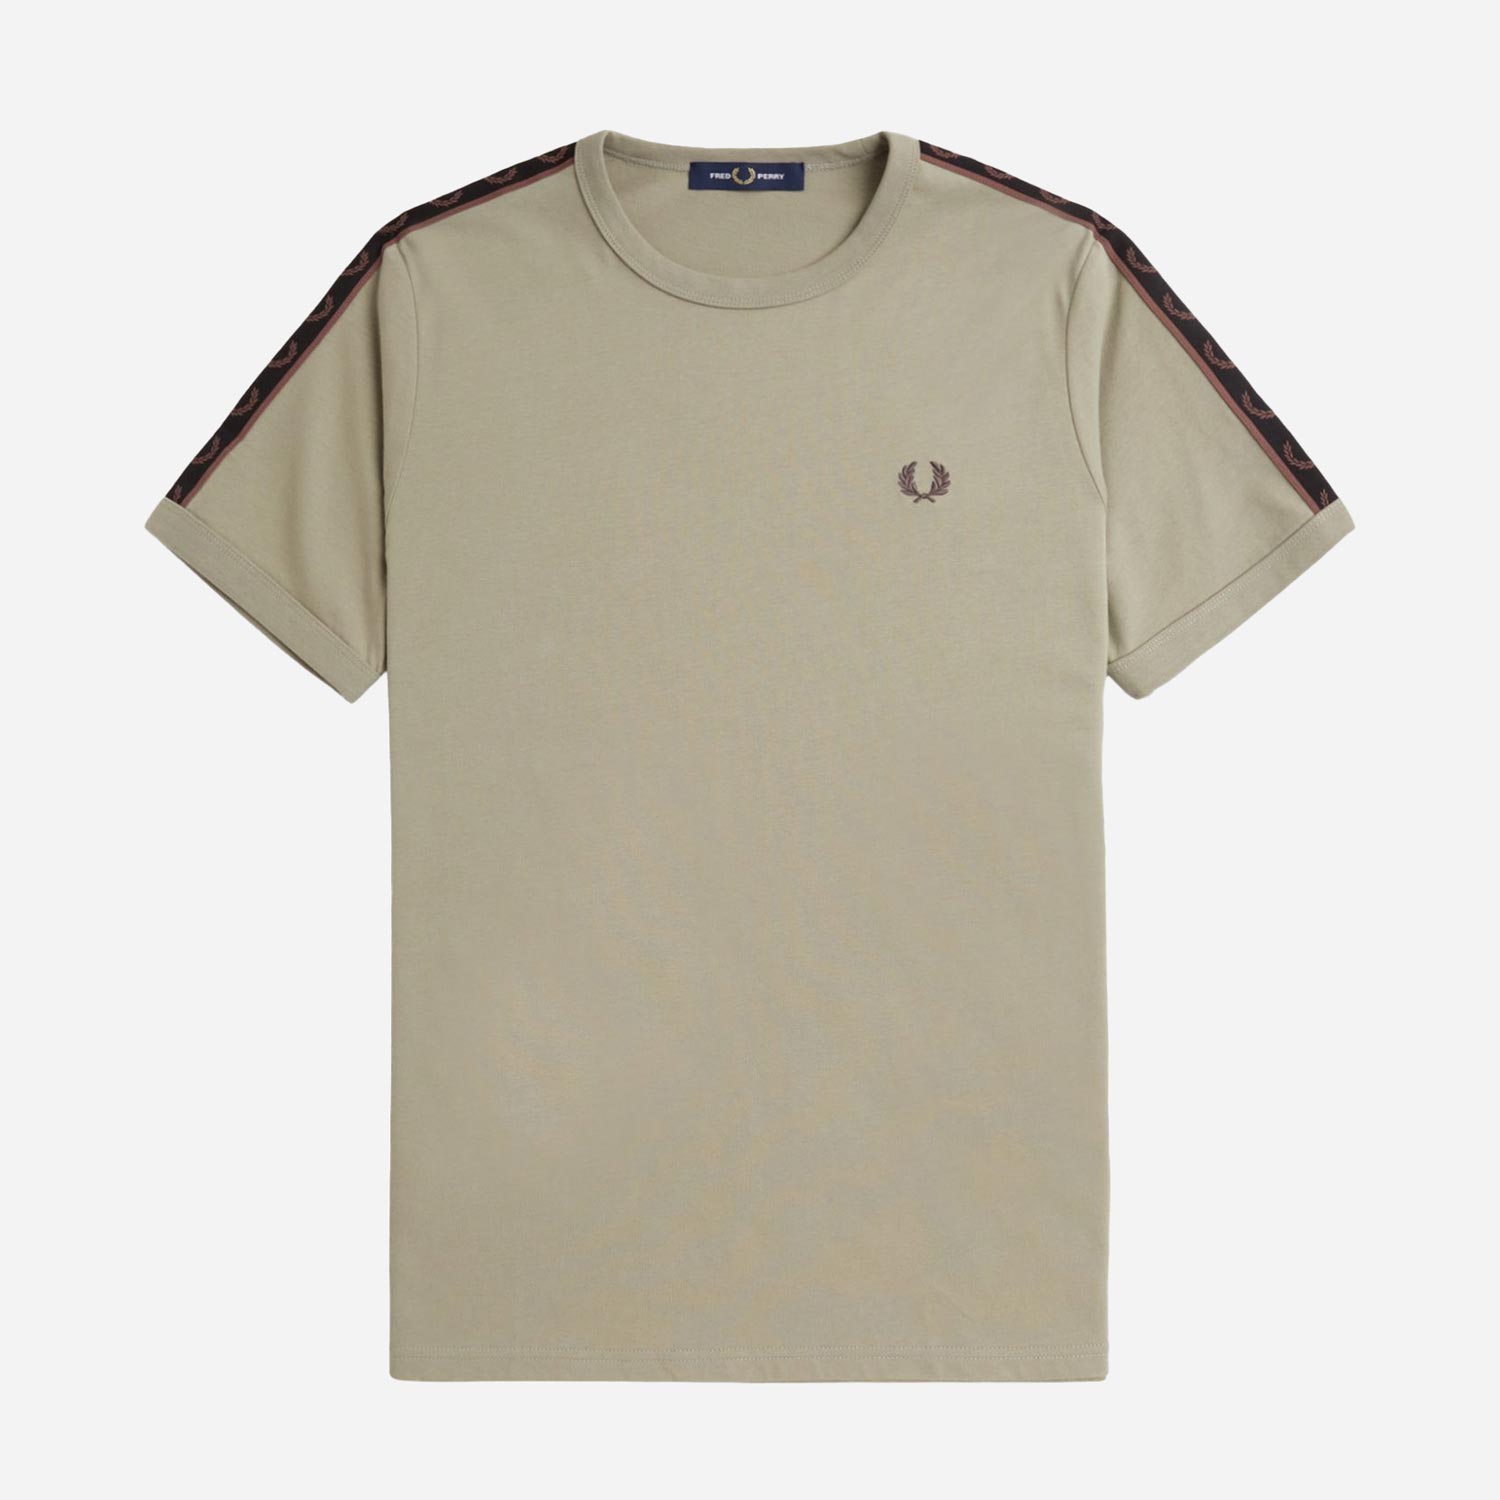 Fred Perry Contrast Tape Regular Fit Short Sleeve Ringer Tee - Warm Grey/Carrington Brick